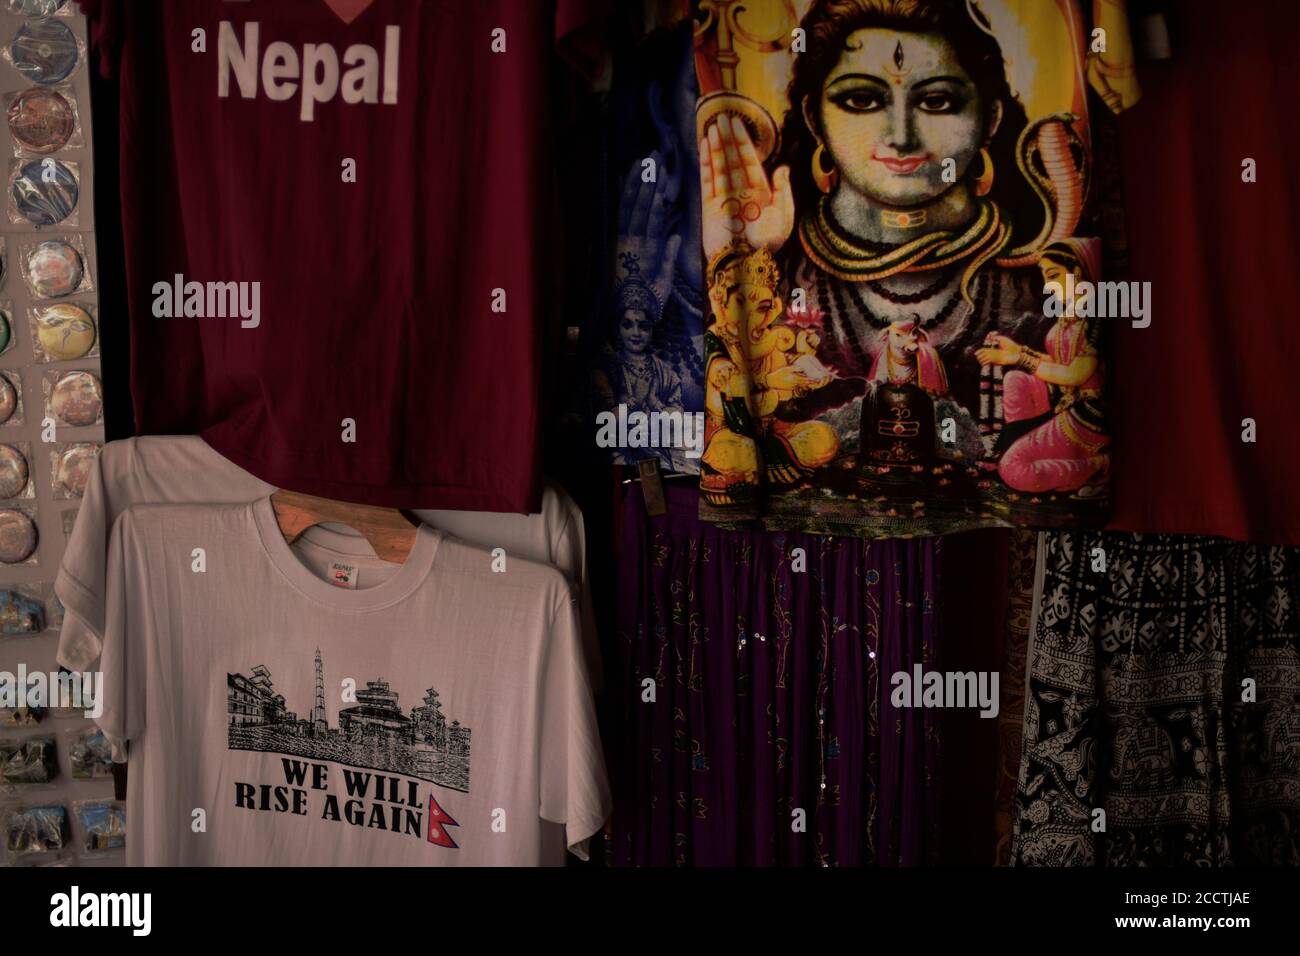 T-shirts for sale at a street side shop in Thamel area, Kathmandu, Nepal. Stock Photo